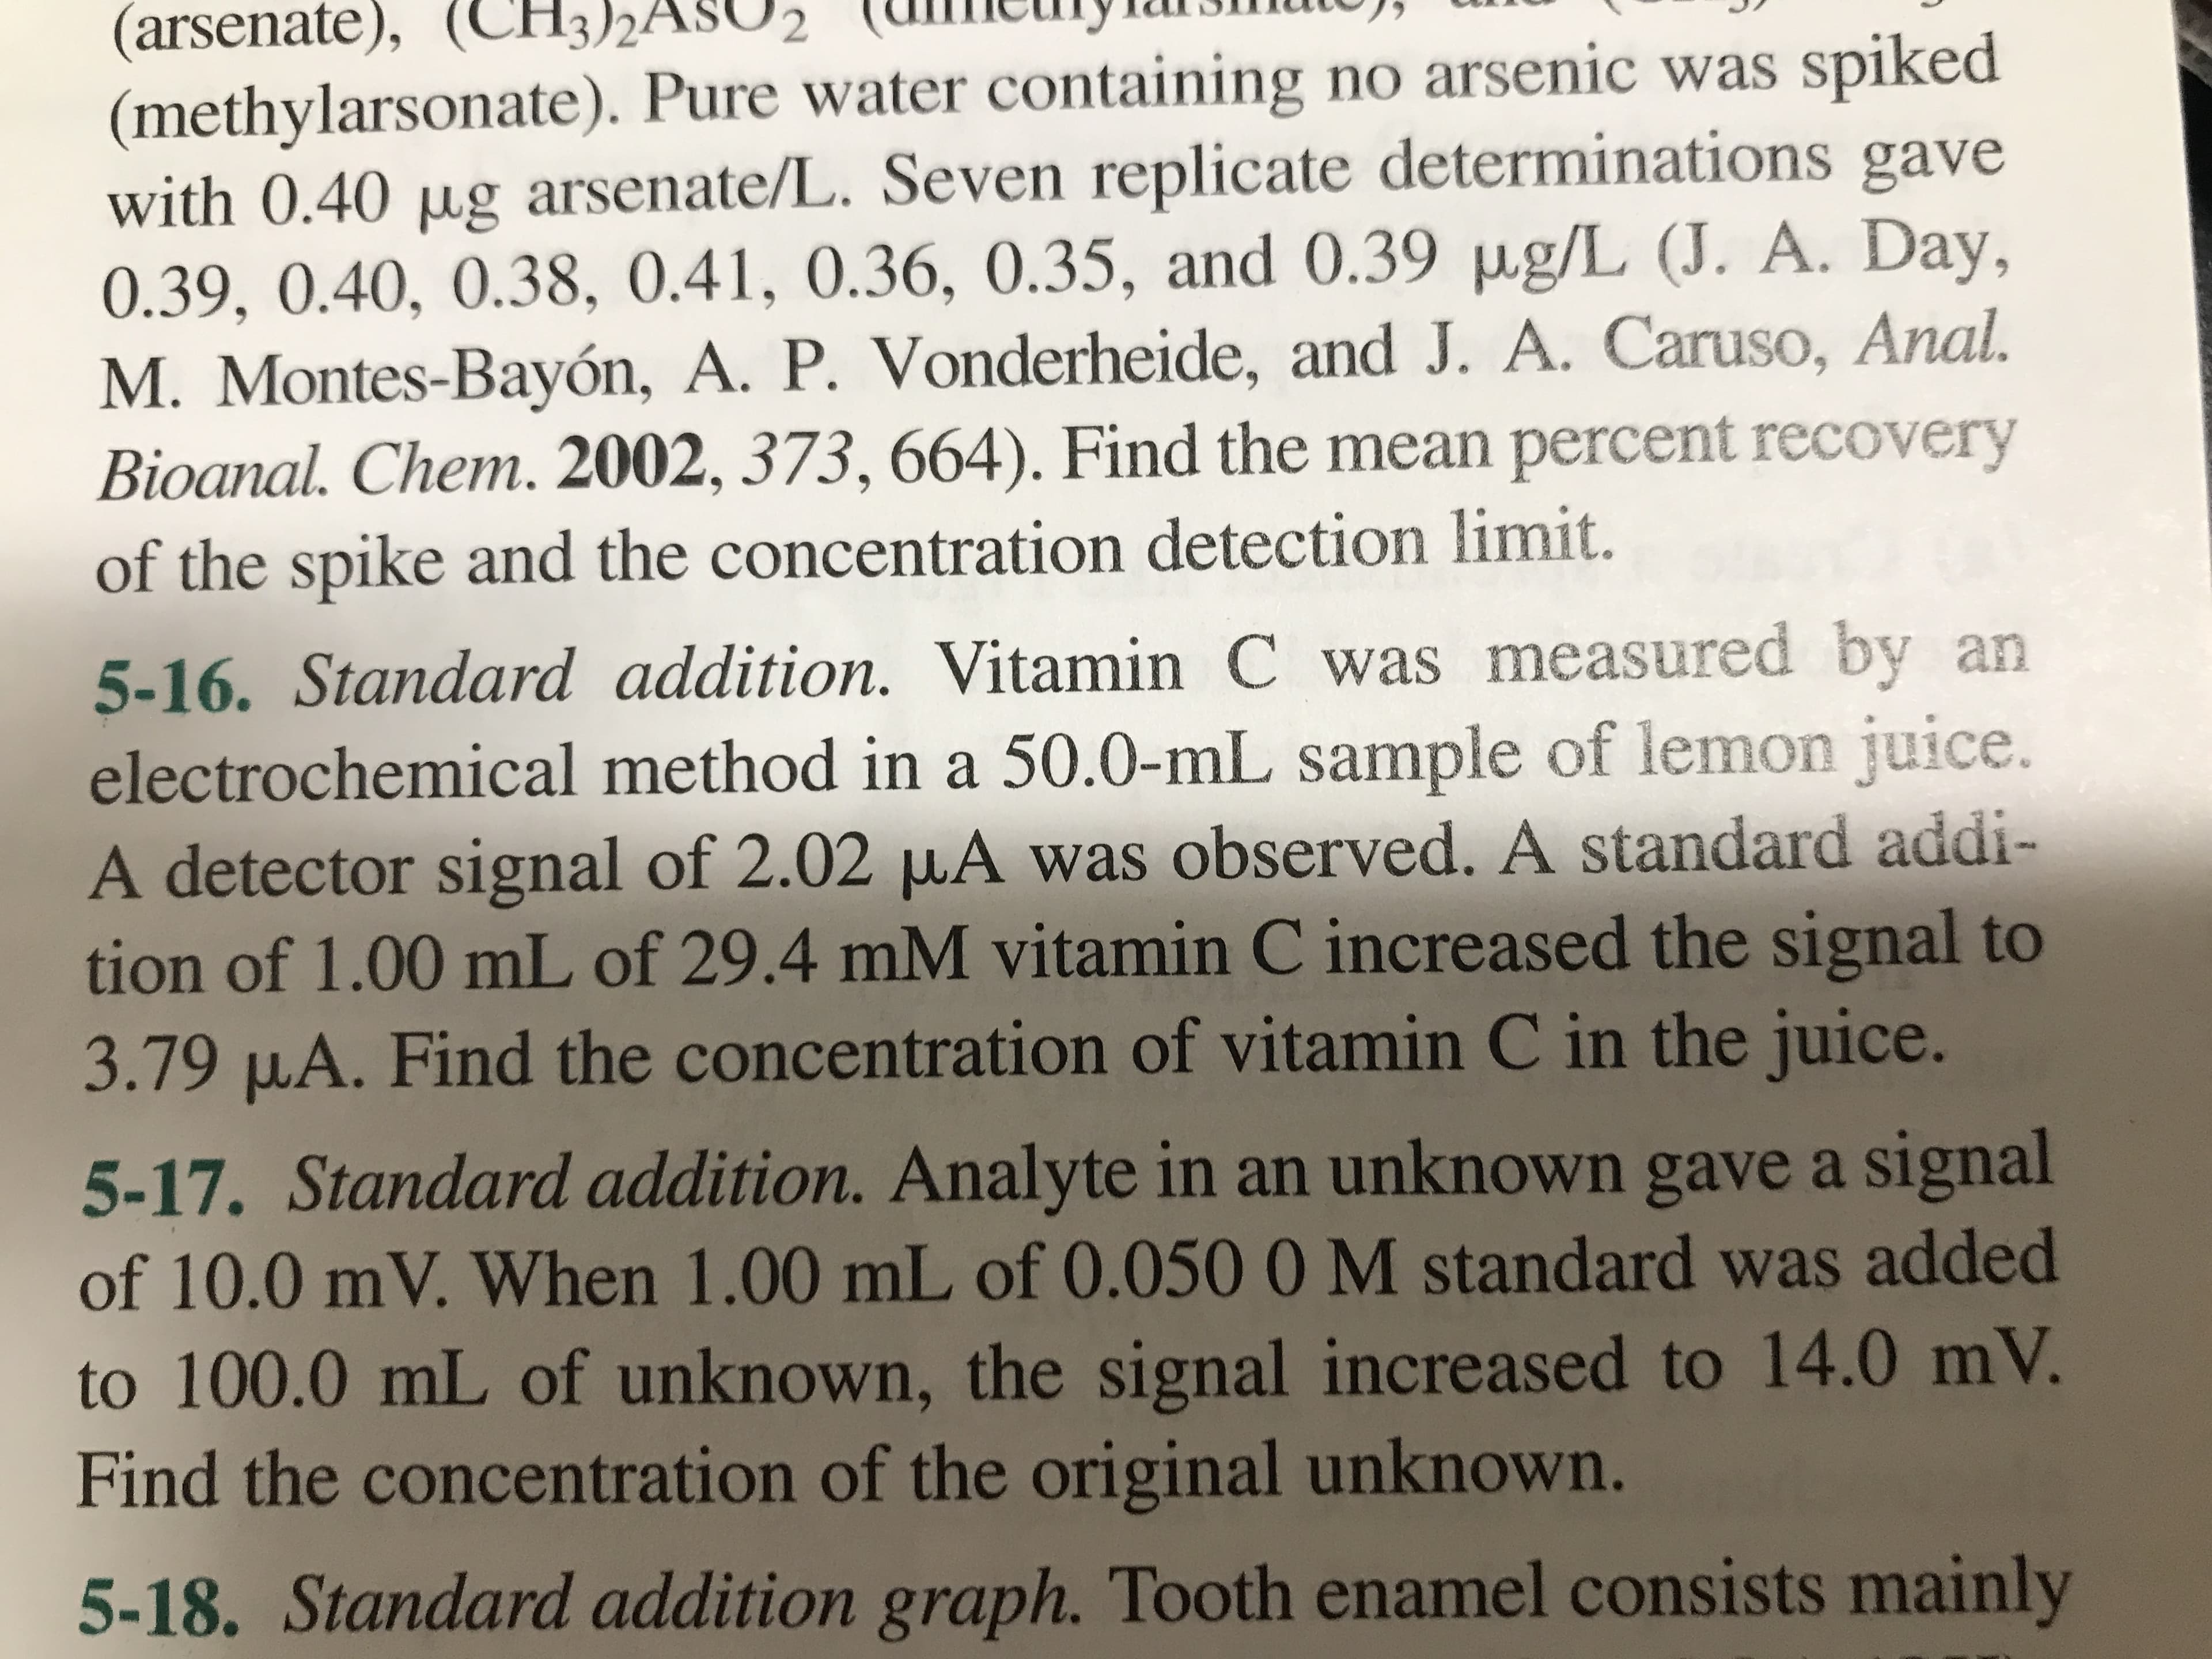 (arsenate), (CH3)2/
(methylarsonate). Pure water containing no arsenic was spiked
with 0.40 µg arsenate/L. Seven replicate determinations gave
0.39, 0.40, 0.38, 0.41, 0.36, 0.35, and 0.39 µg/L (J. A. Day,
M. Montes-Bayón, A. P. Vonderheide, and J. A. Caruso, Anal.
Bioanal. Chem. 2002, 373, 664). Find the mean percent recovery
of the spike and the concentration detection limit.
5-16. Standard addition. Vitamin C was measured by an
electrochemical method in a 50.0-mL sample of lemon juice.
A detector signal of 2.02 µA was observed. A standard addi-
tion of 1.00 mL of 29.4 mM vitamin C increased the signal to
3.79 µA. Find the concentration of vitamin C in the juice.
5-17. Standard addition. Analyte in an unknown gave a signal
of 10.0 mV. When 1.00 mL of 0.050 0 M standard was added
to 100.0 mL of unknown, the signal increased to 14.0 mV.
Find the concentration of the original unknown.
5-18. Standard addition graph. Tooth enamel consists mainly
